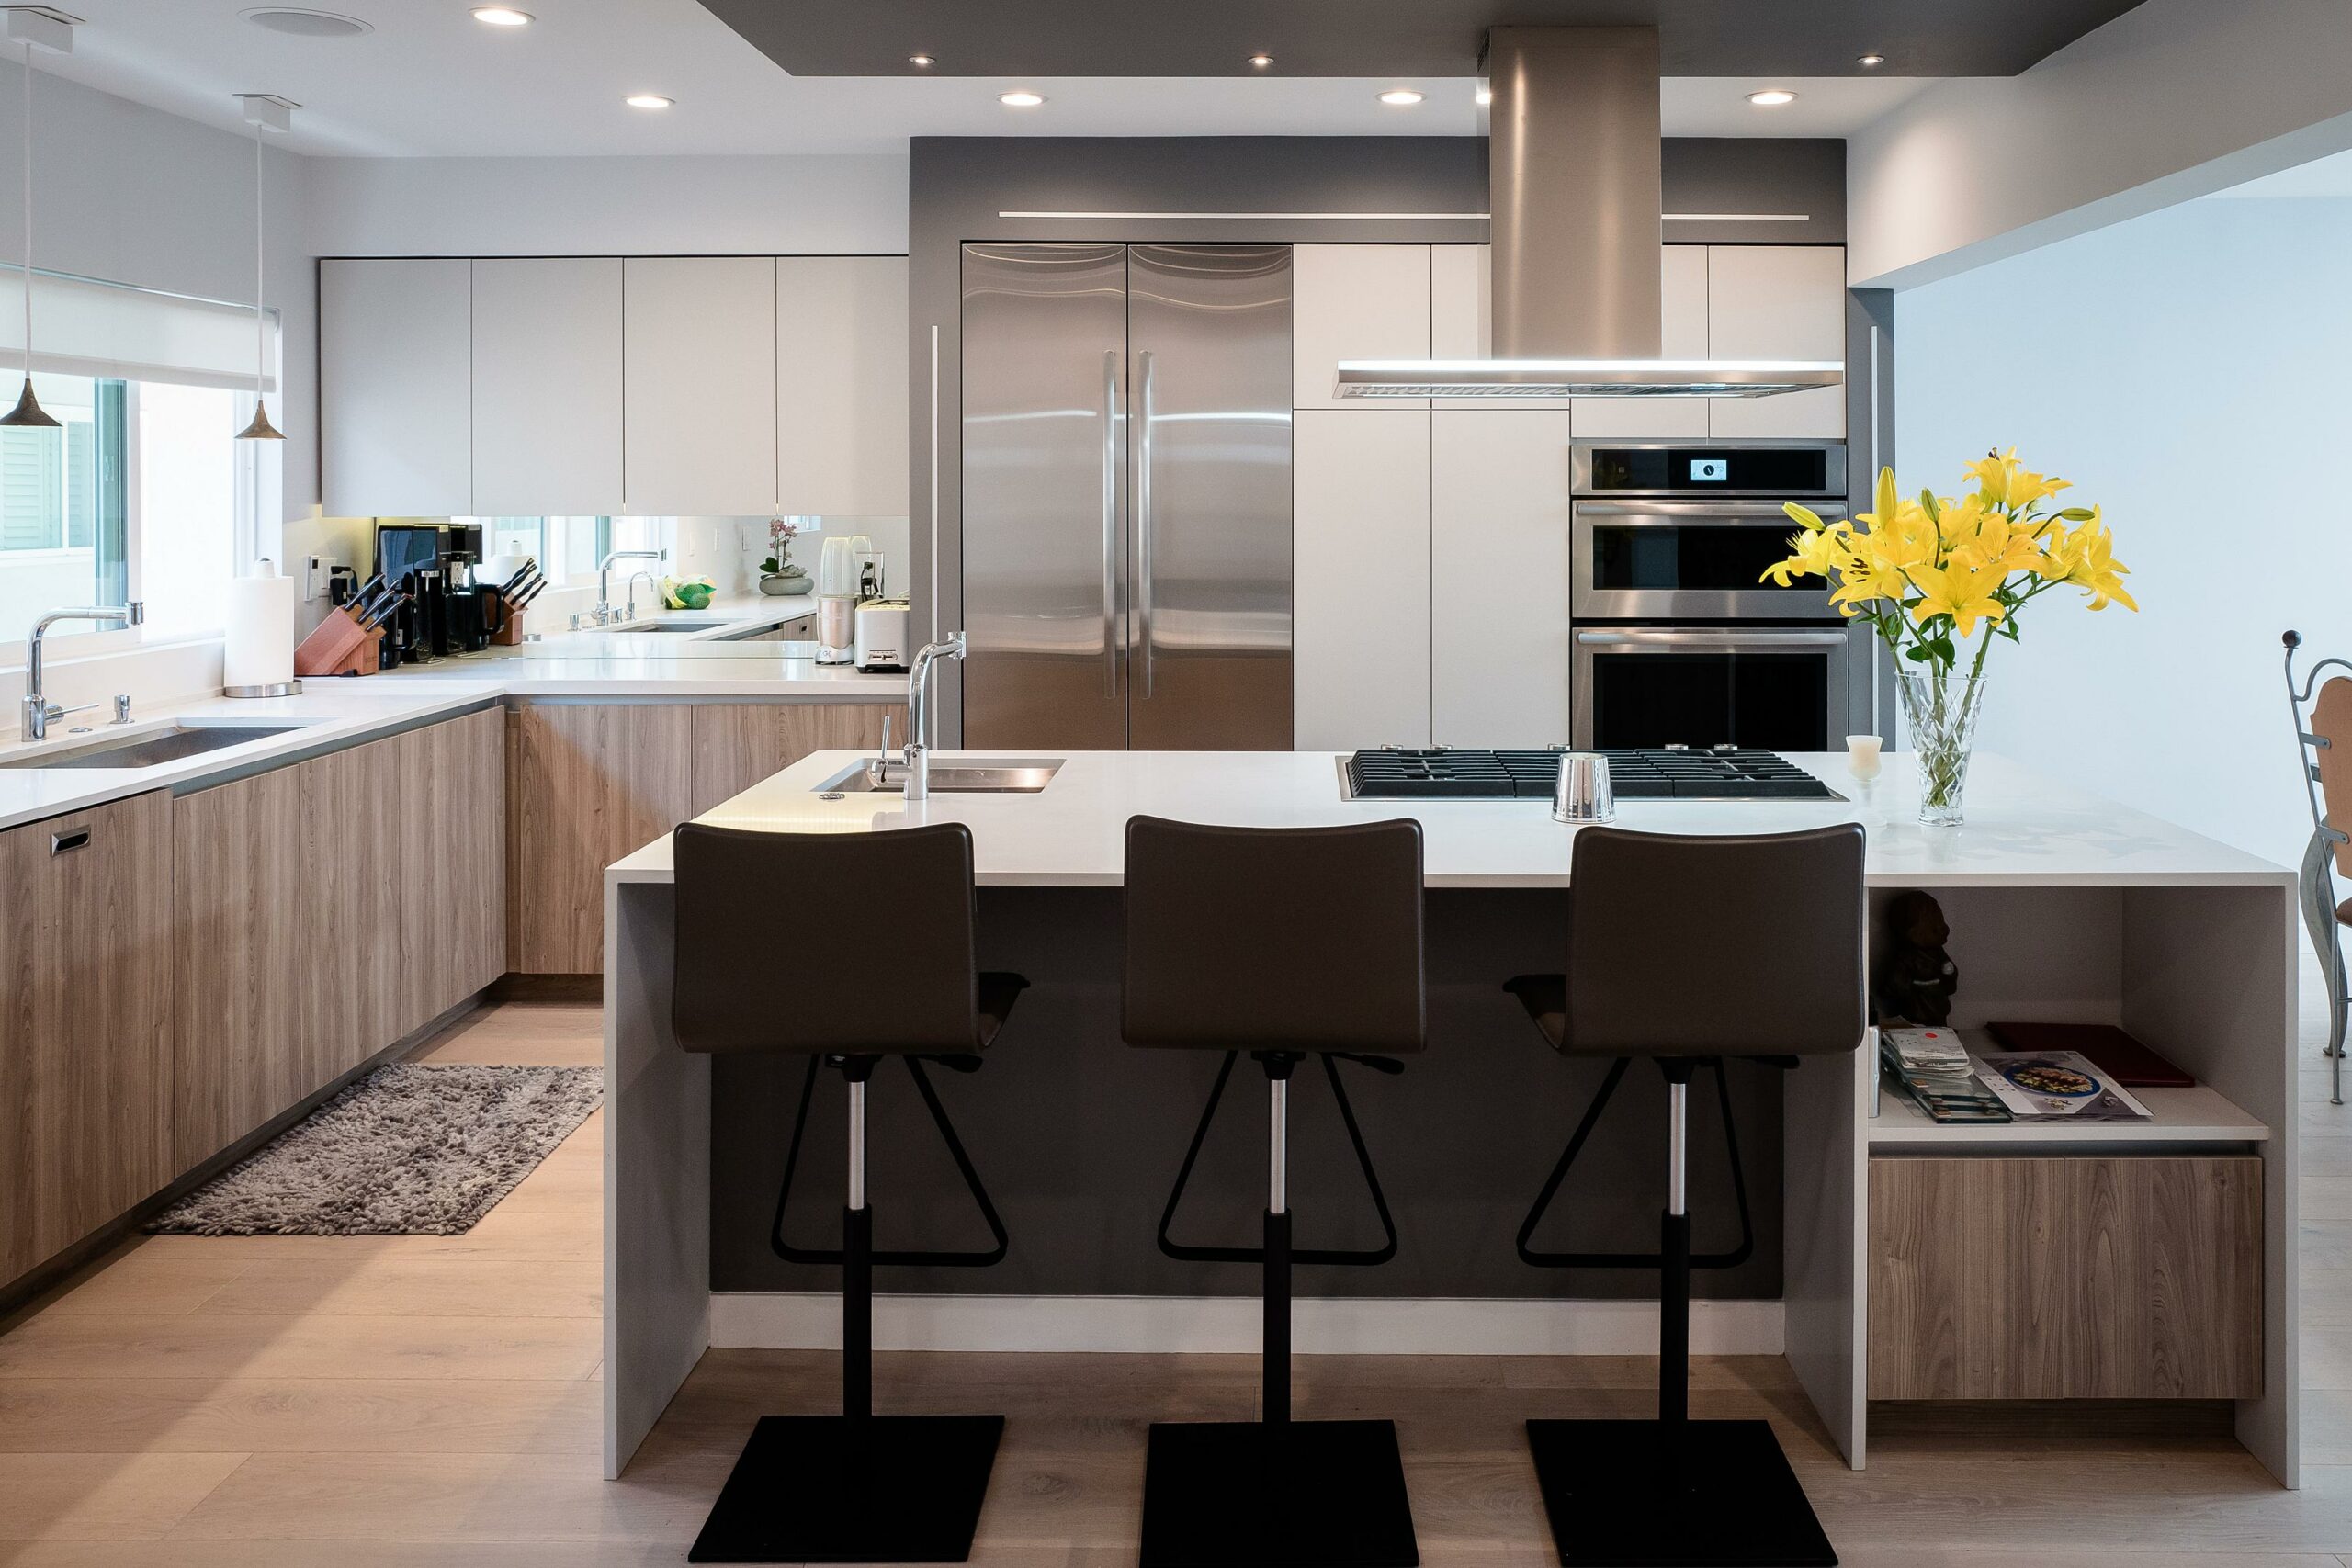 Modern kitchen interior with island and stainless steel appliances.